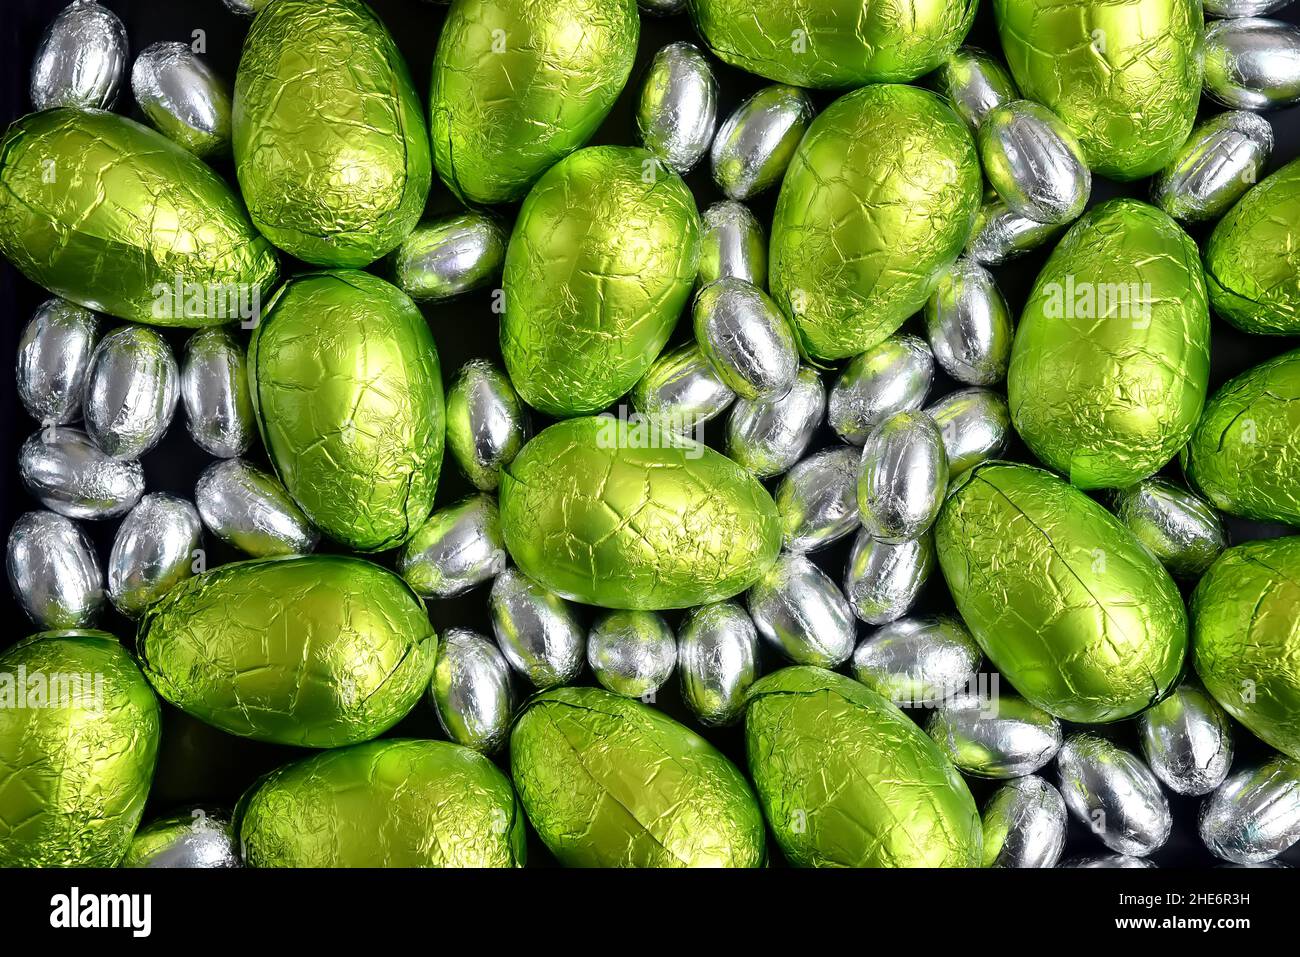 Large & small green, lime green and silver spring colours of foil wrapped chocolate easter eggs, against a black background. Stock Photo